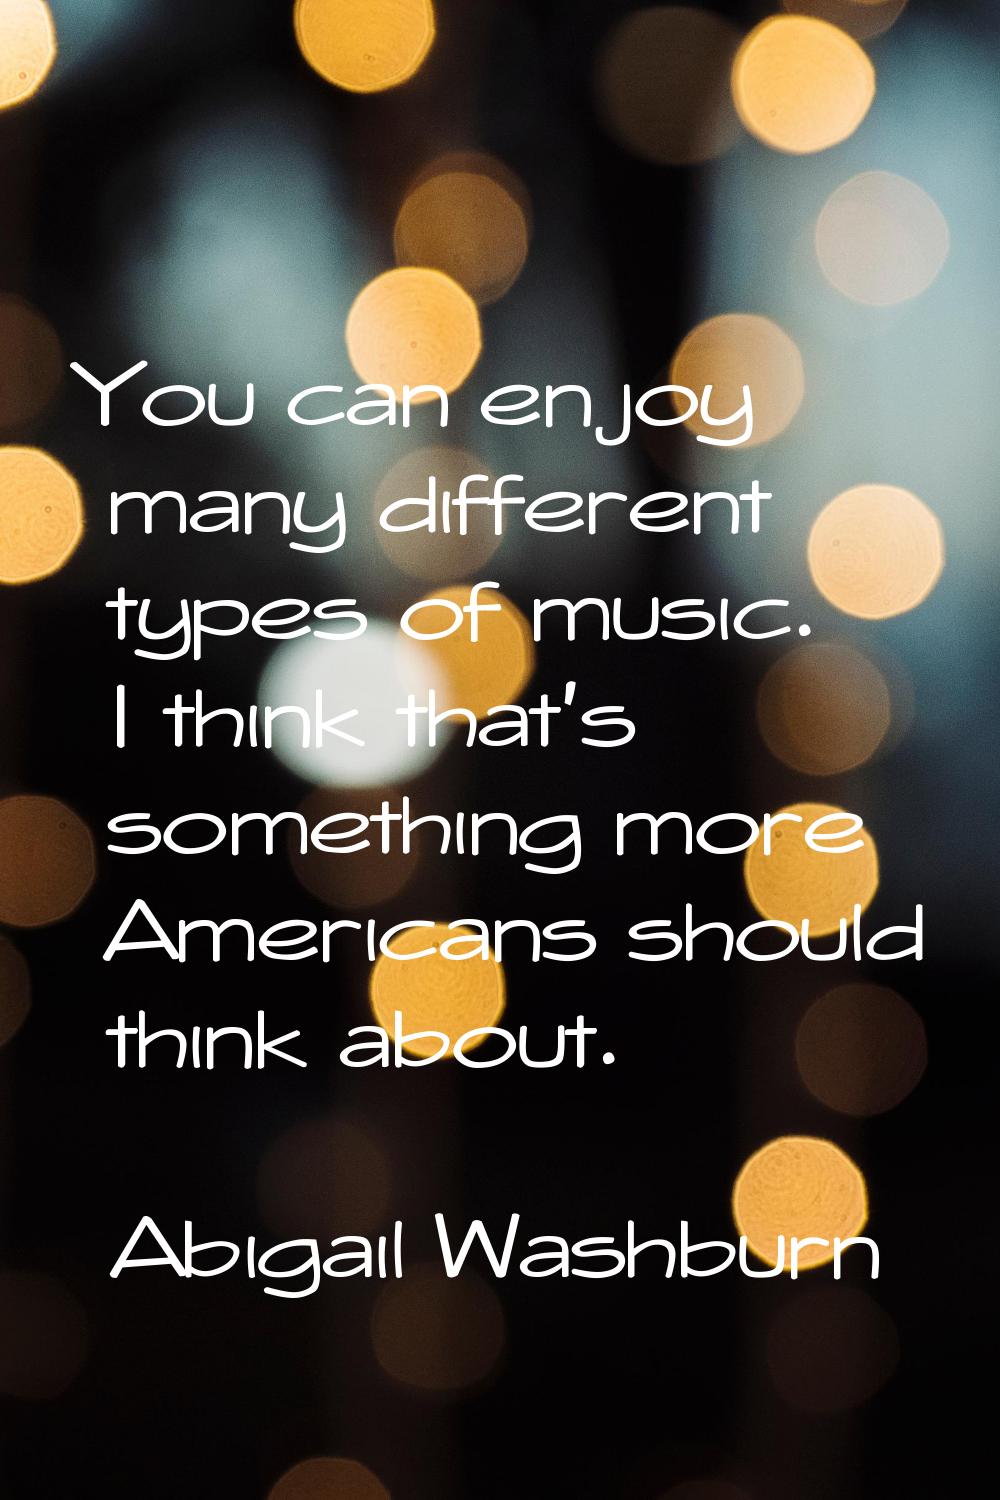 You can enjoy many different types of music. I think that's something more Americans should think a